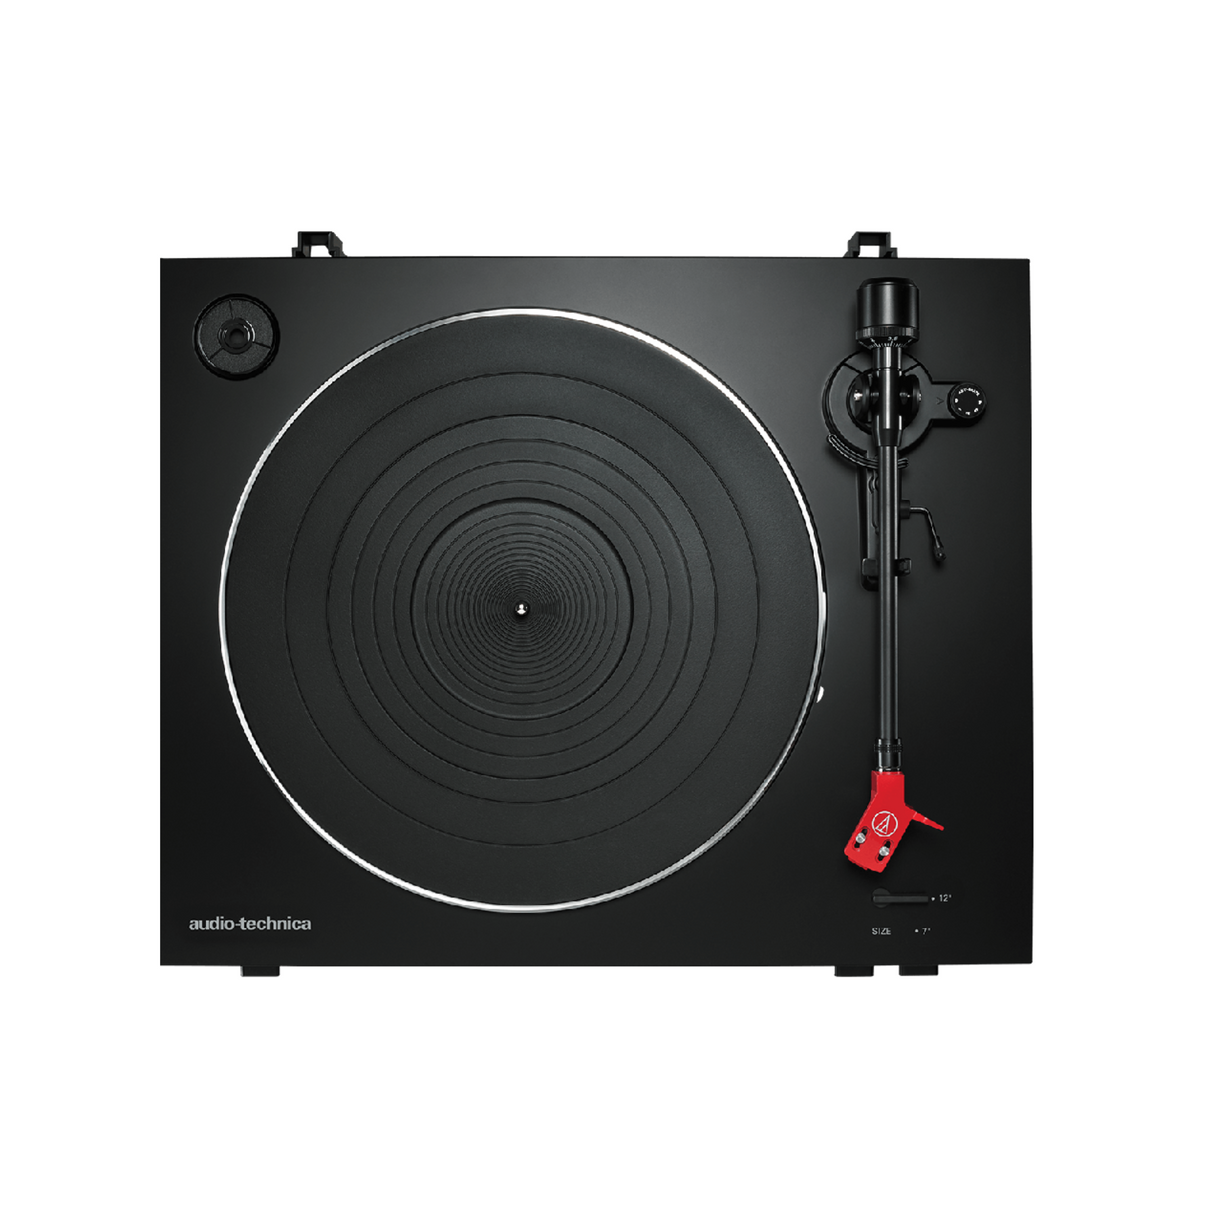 Audio Technica AT-LP3 Fully Automatic Belt-Drive Stereo Turntable